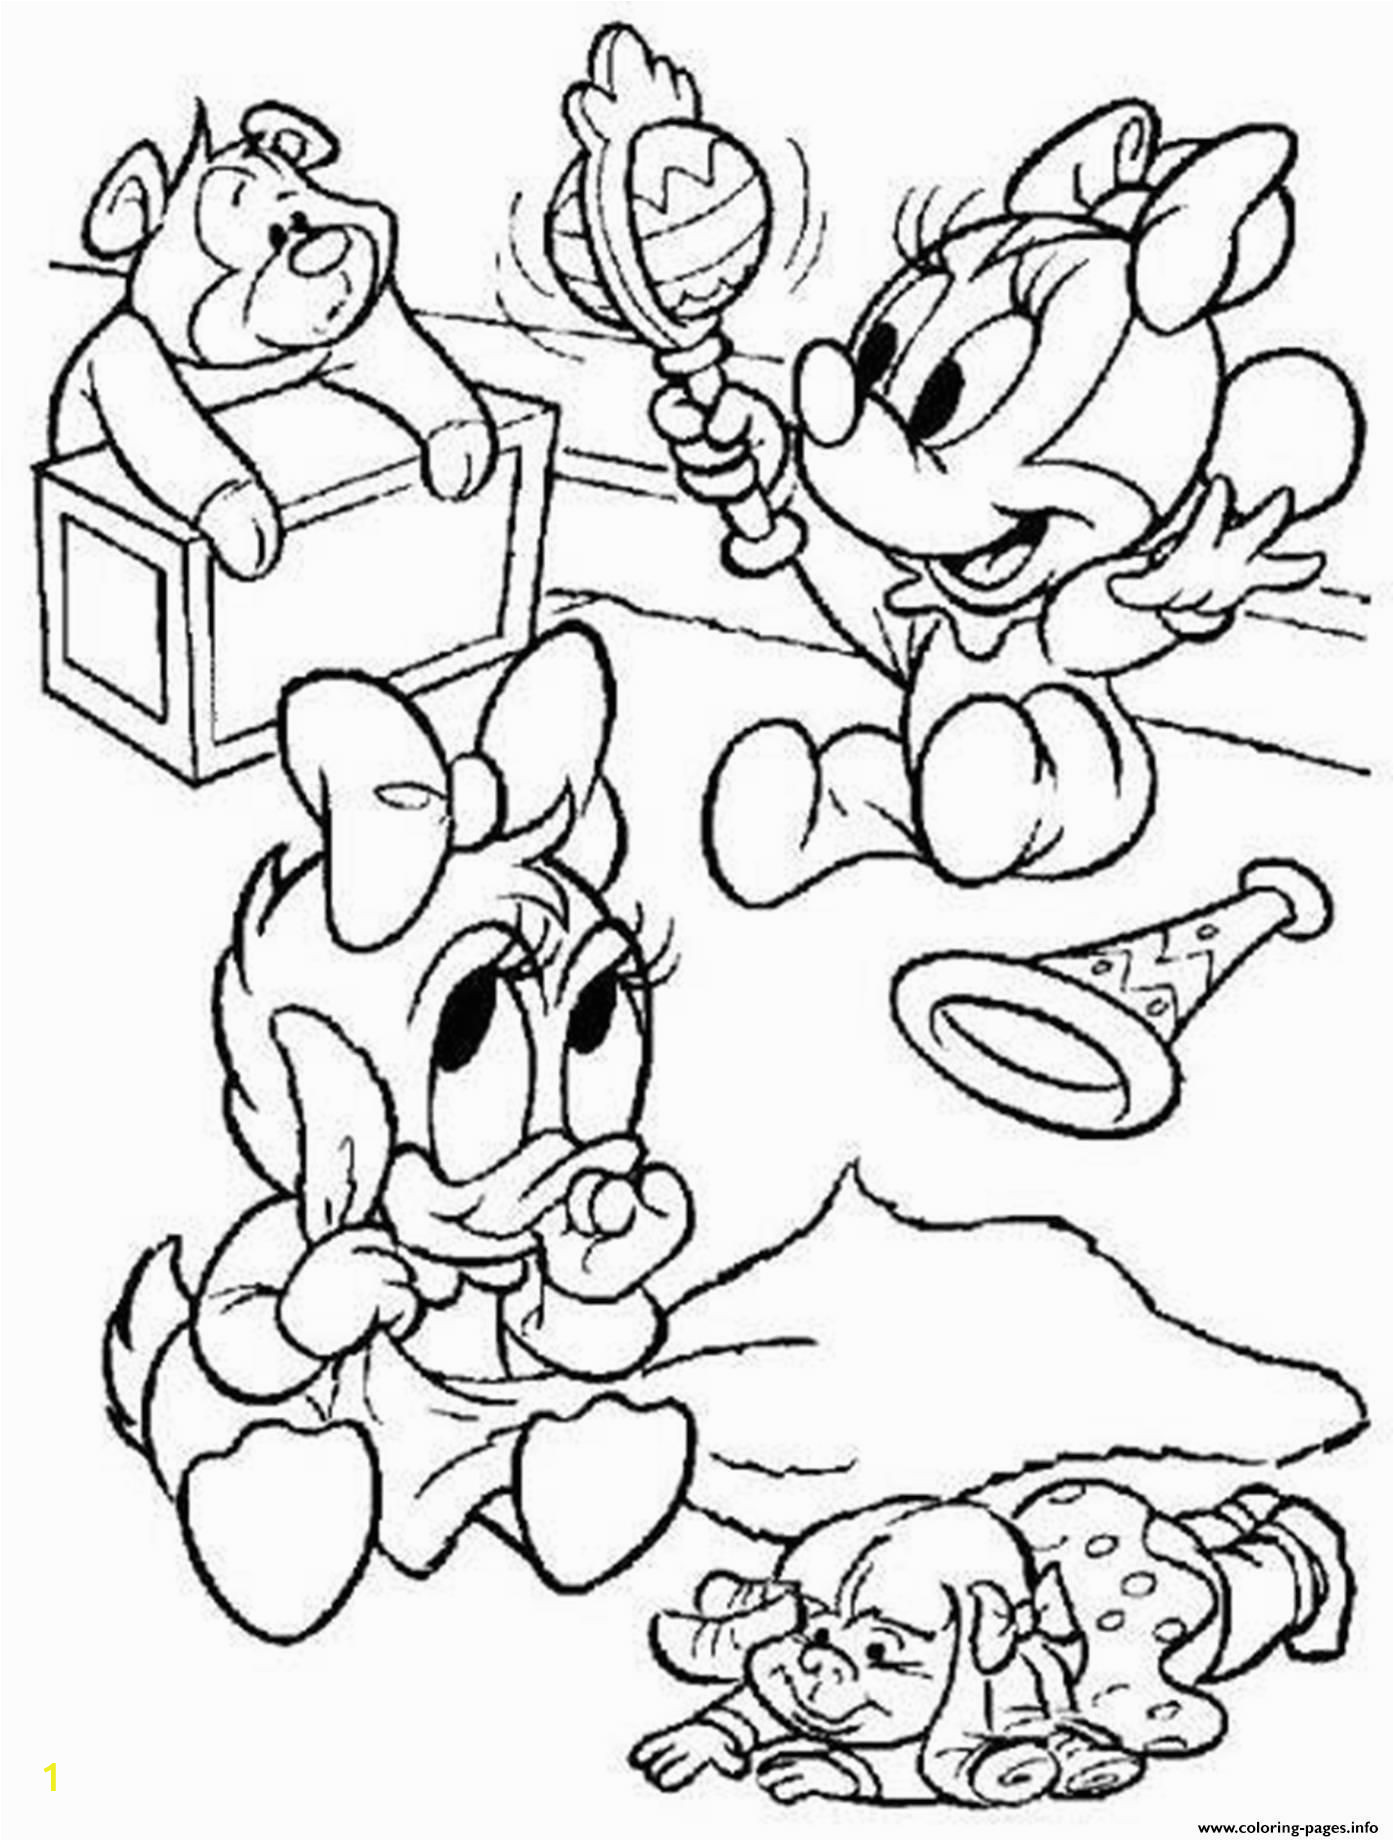 Minnie Mouse and Daisy Duck Coloring Pages Minnie Mouse and Daisy Duck Coloring Pages at Getdrawings